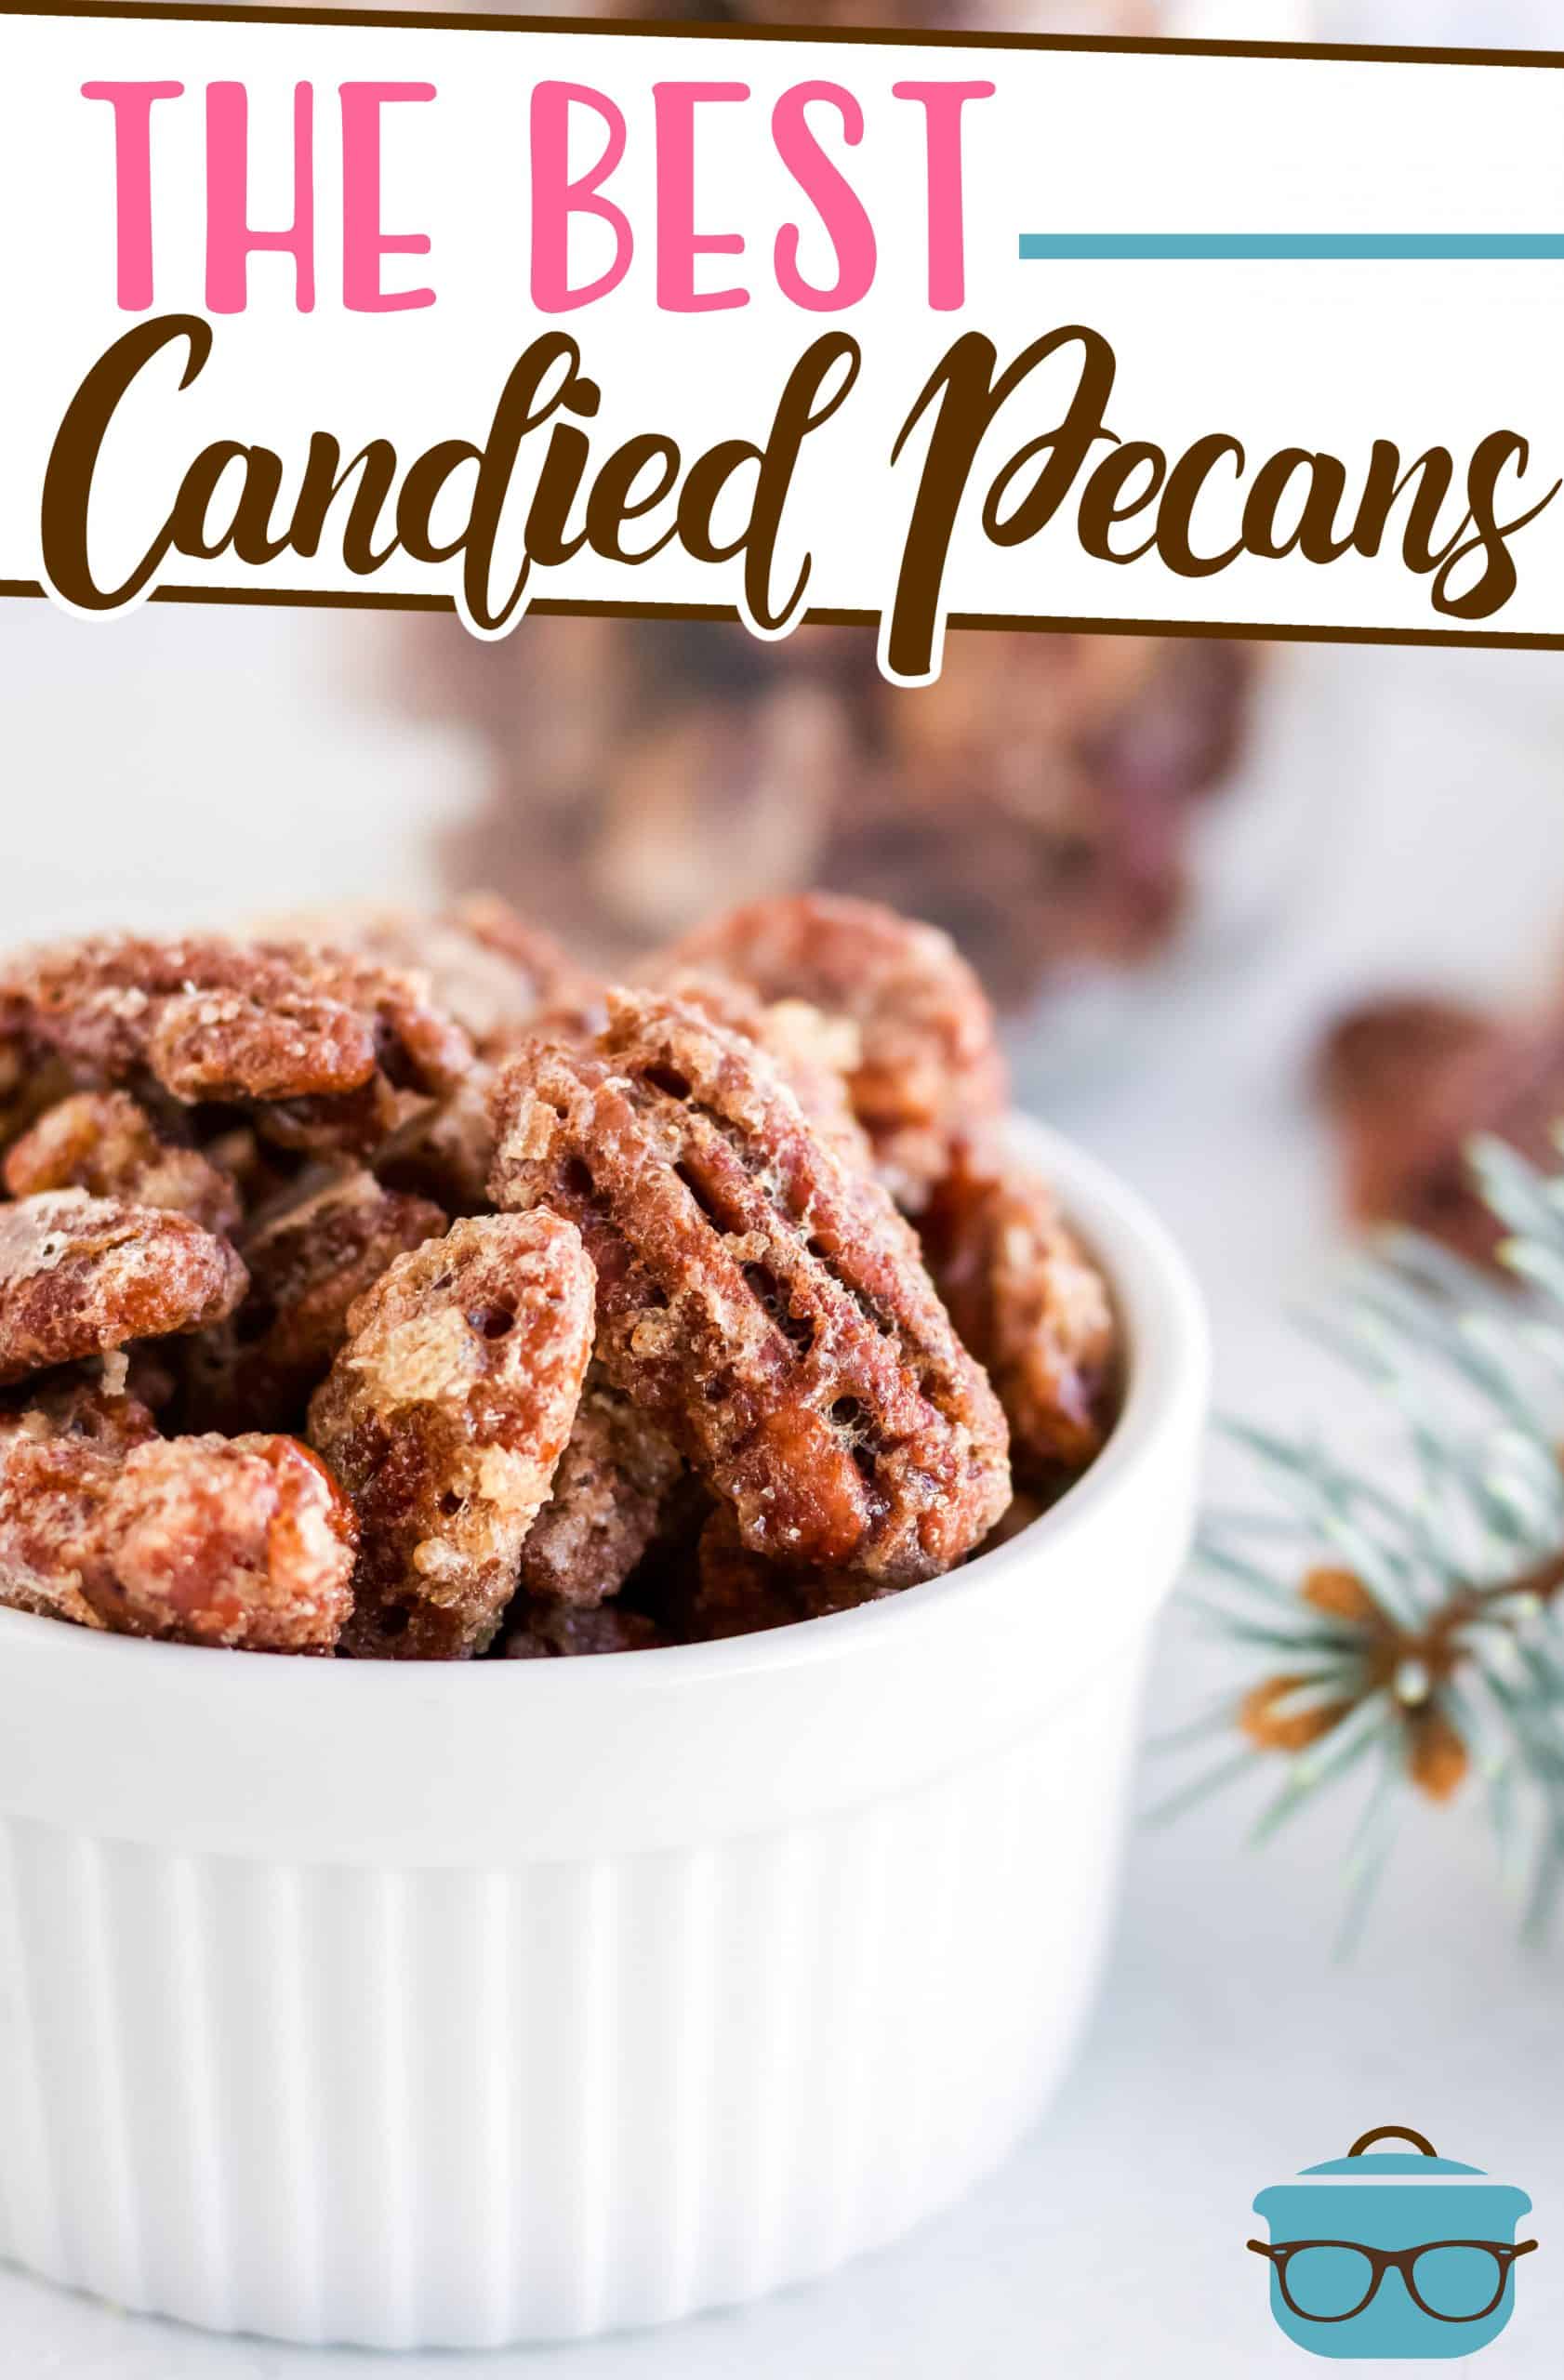 The Best Candied Pecans recipe from The Country Cook, candied pecans shown in a small white bowl with a small pine tree branch on the side.